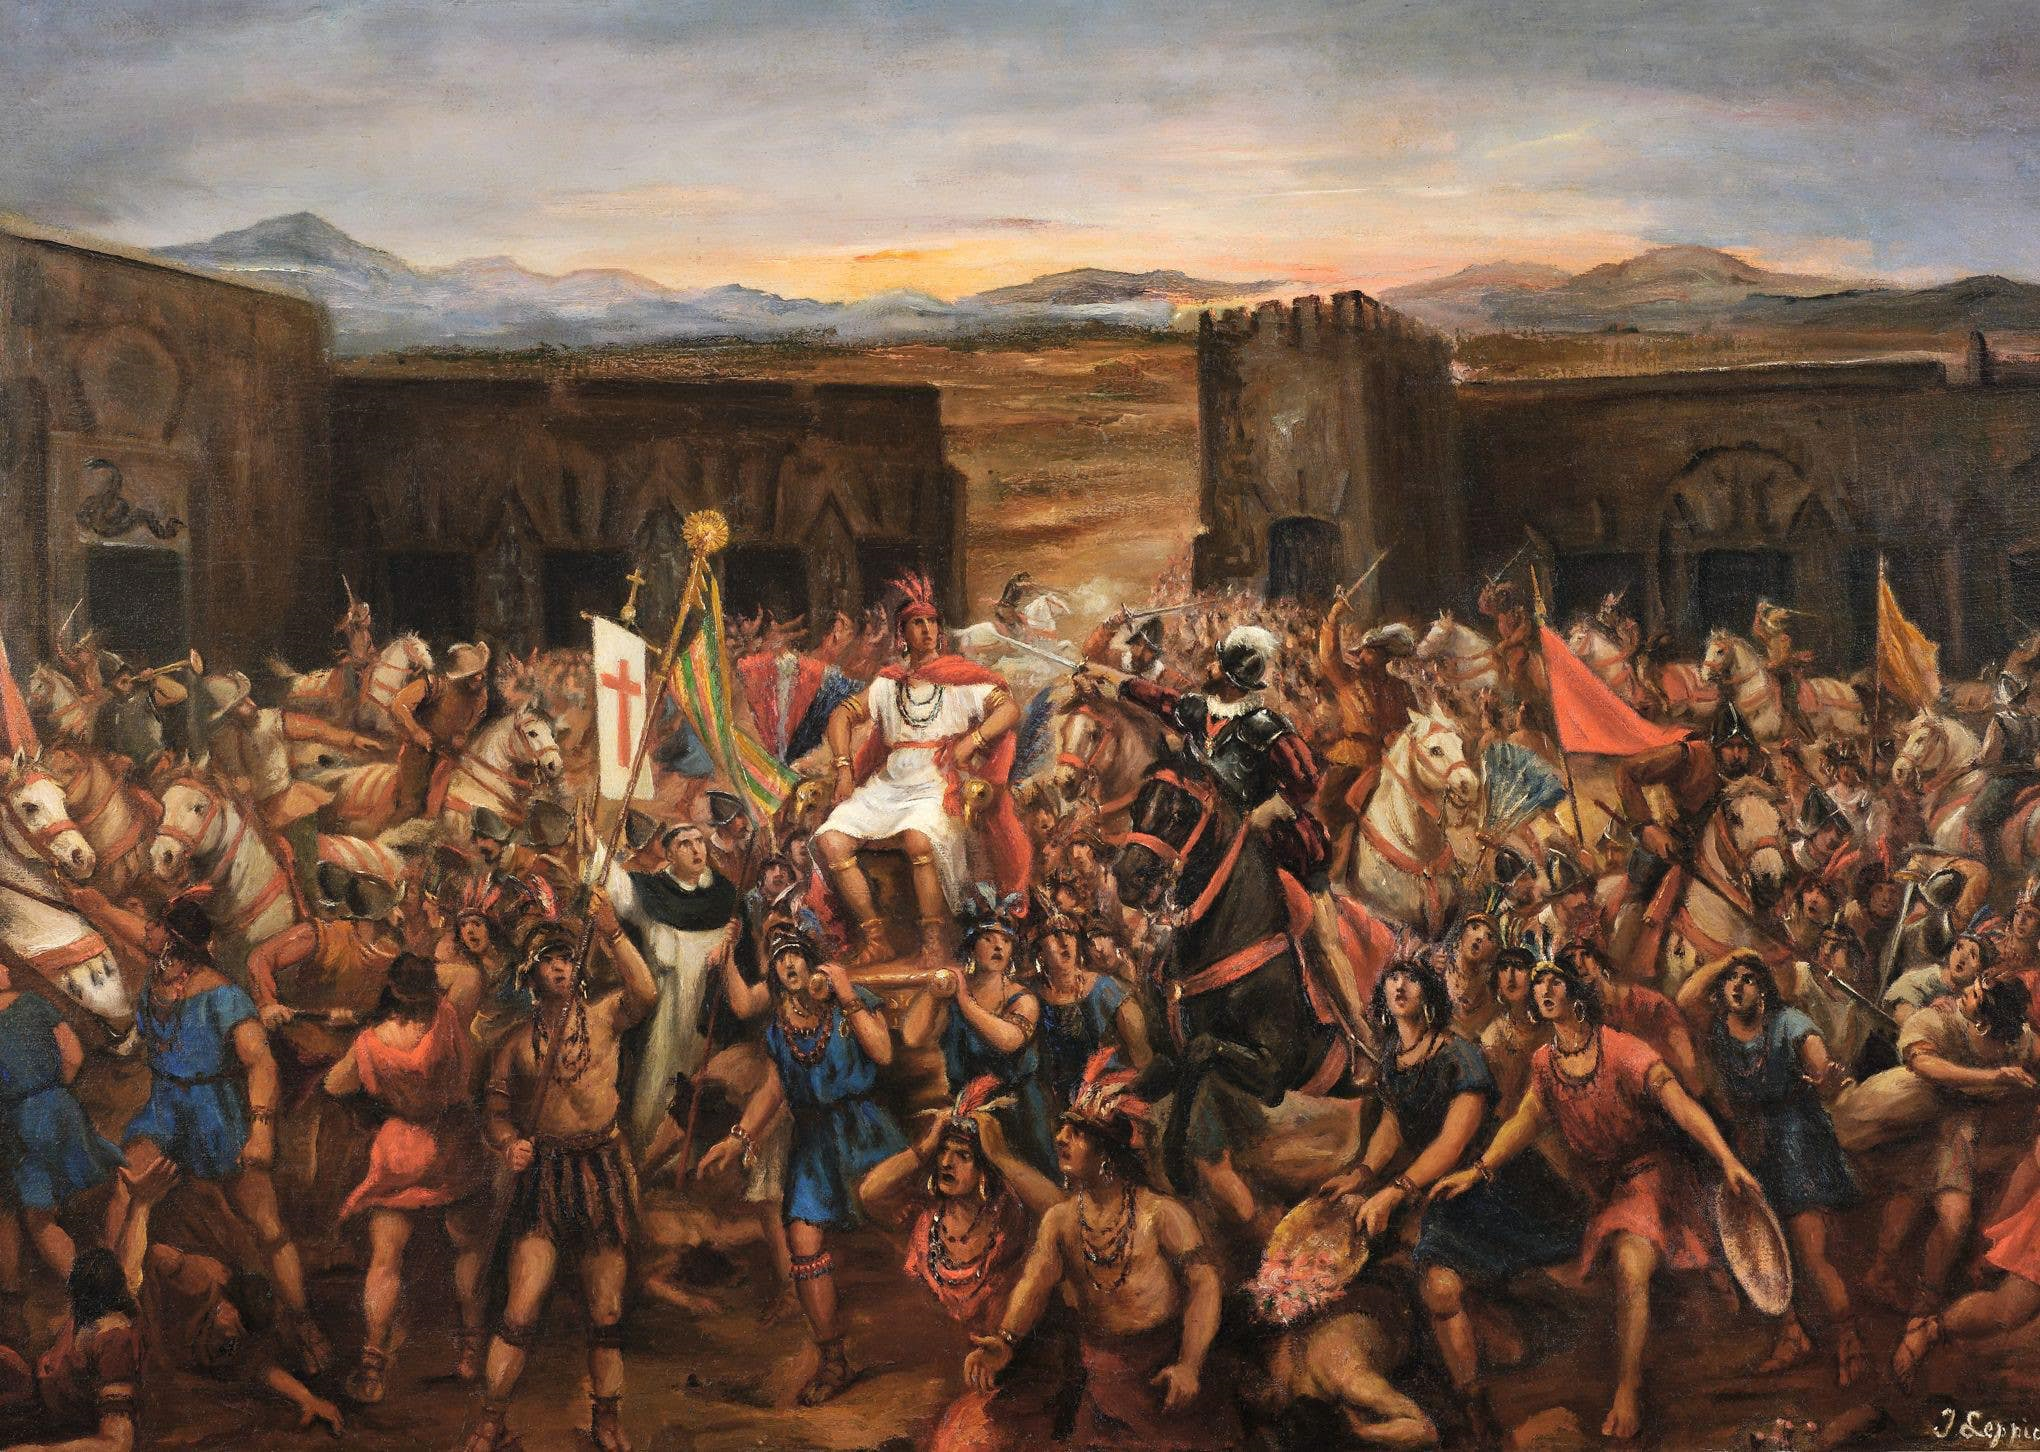 <p>Francisco Pizarro’s conquest of the Inca Empire in the 1530s was a decisive and brutal episode. With a small force of Spanish soldiers and aided by existing Inca civil war tensions, Pizarro captured the Inca emperor Atahualpa in 1532. Despite a massive ransom paid in gold, Atahualpa was executed, shattering Inca leadership. Pizarro then marched on the Inca capital, Cuzco, seizing control of the vast empire. This swift conquest, fueled by superior weaponry and tactics, marked the end of the Inca Empire and paved the way for the Spanish colonization of Peru.</p>